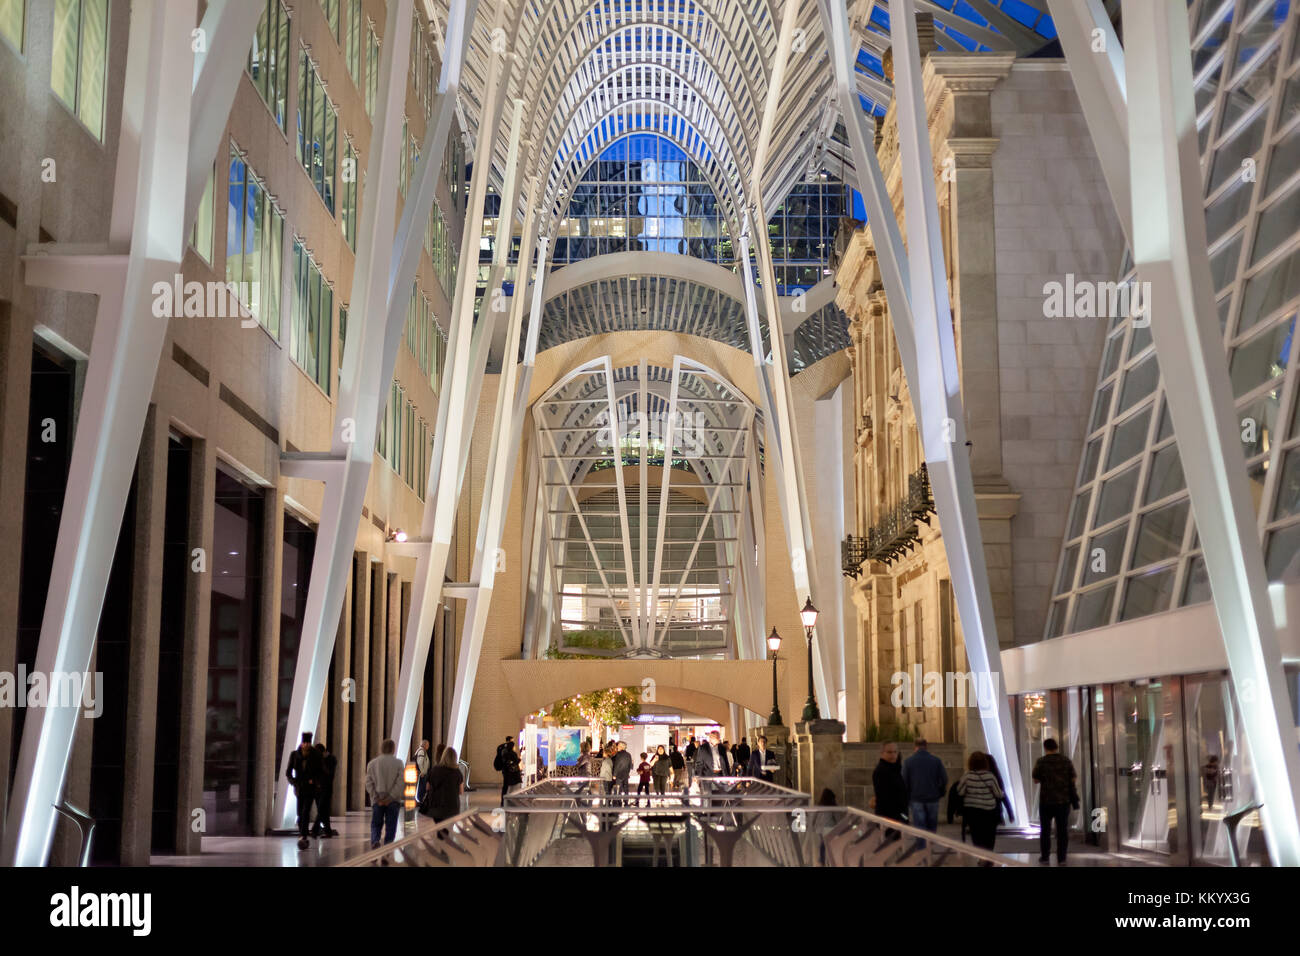 Toronto, Canada - Oct 21, 2017: Interior of the Brookfield Place in Toronto. Brookfield Place is an office and shopping complex downtown in Toronto, C Stock Photo